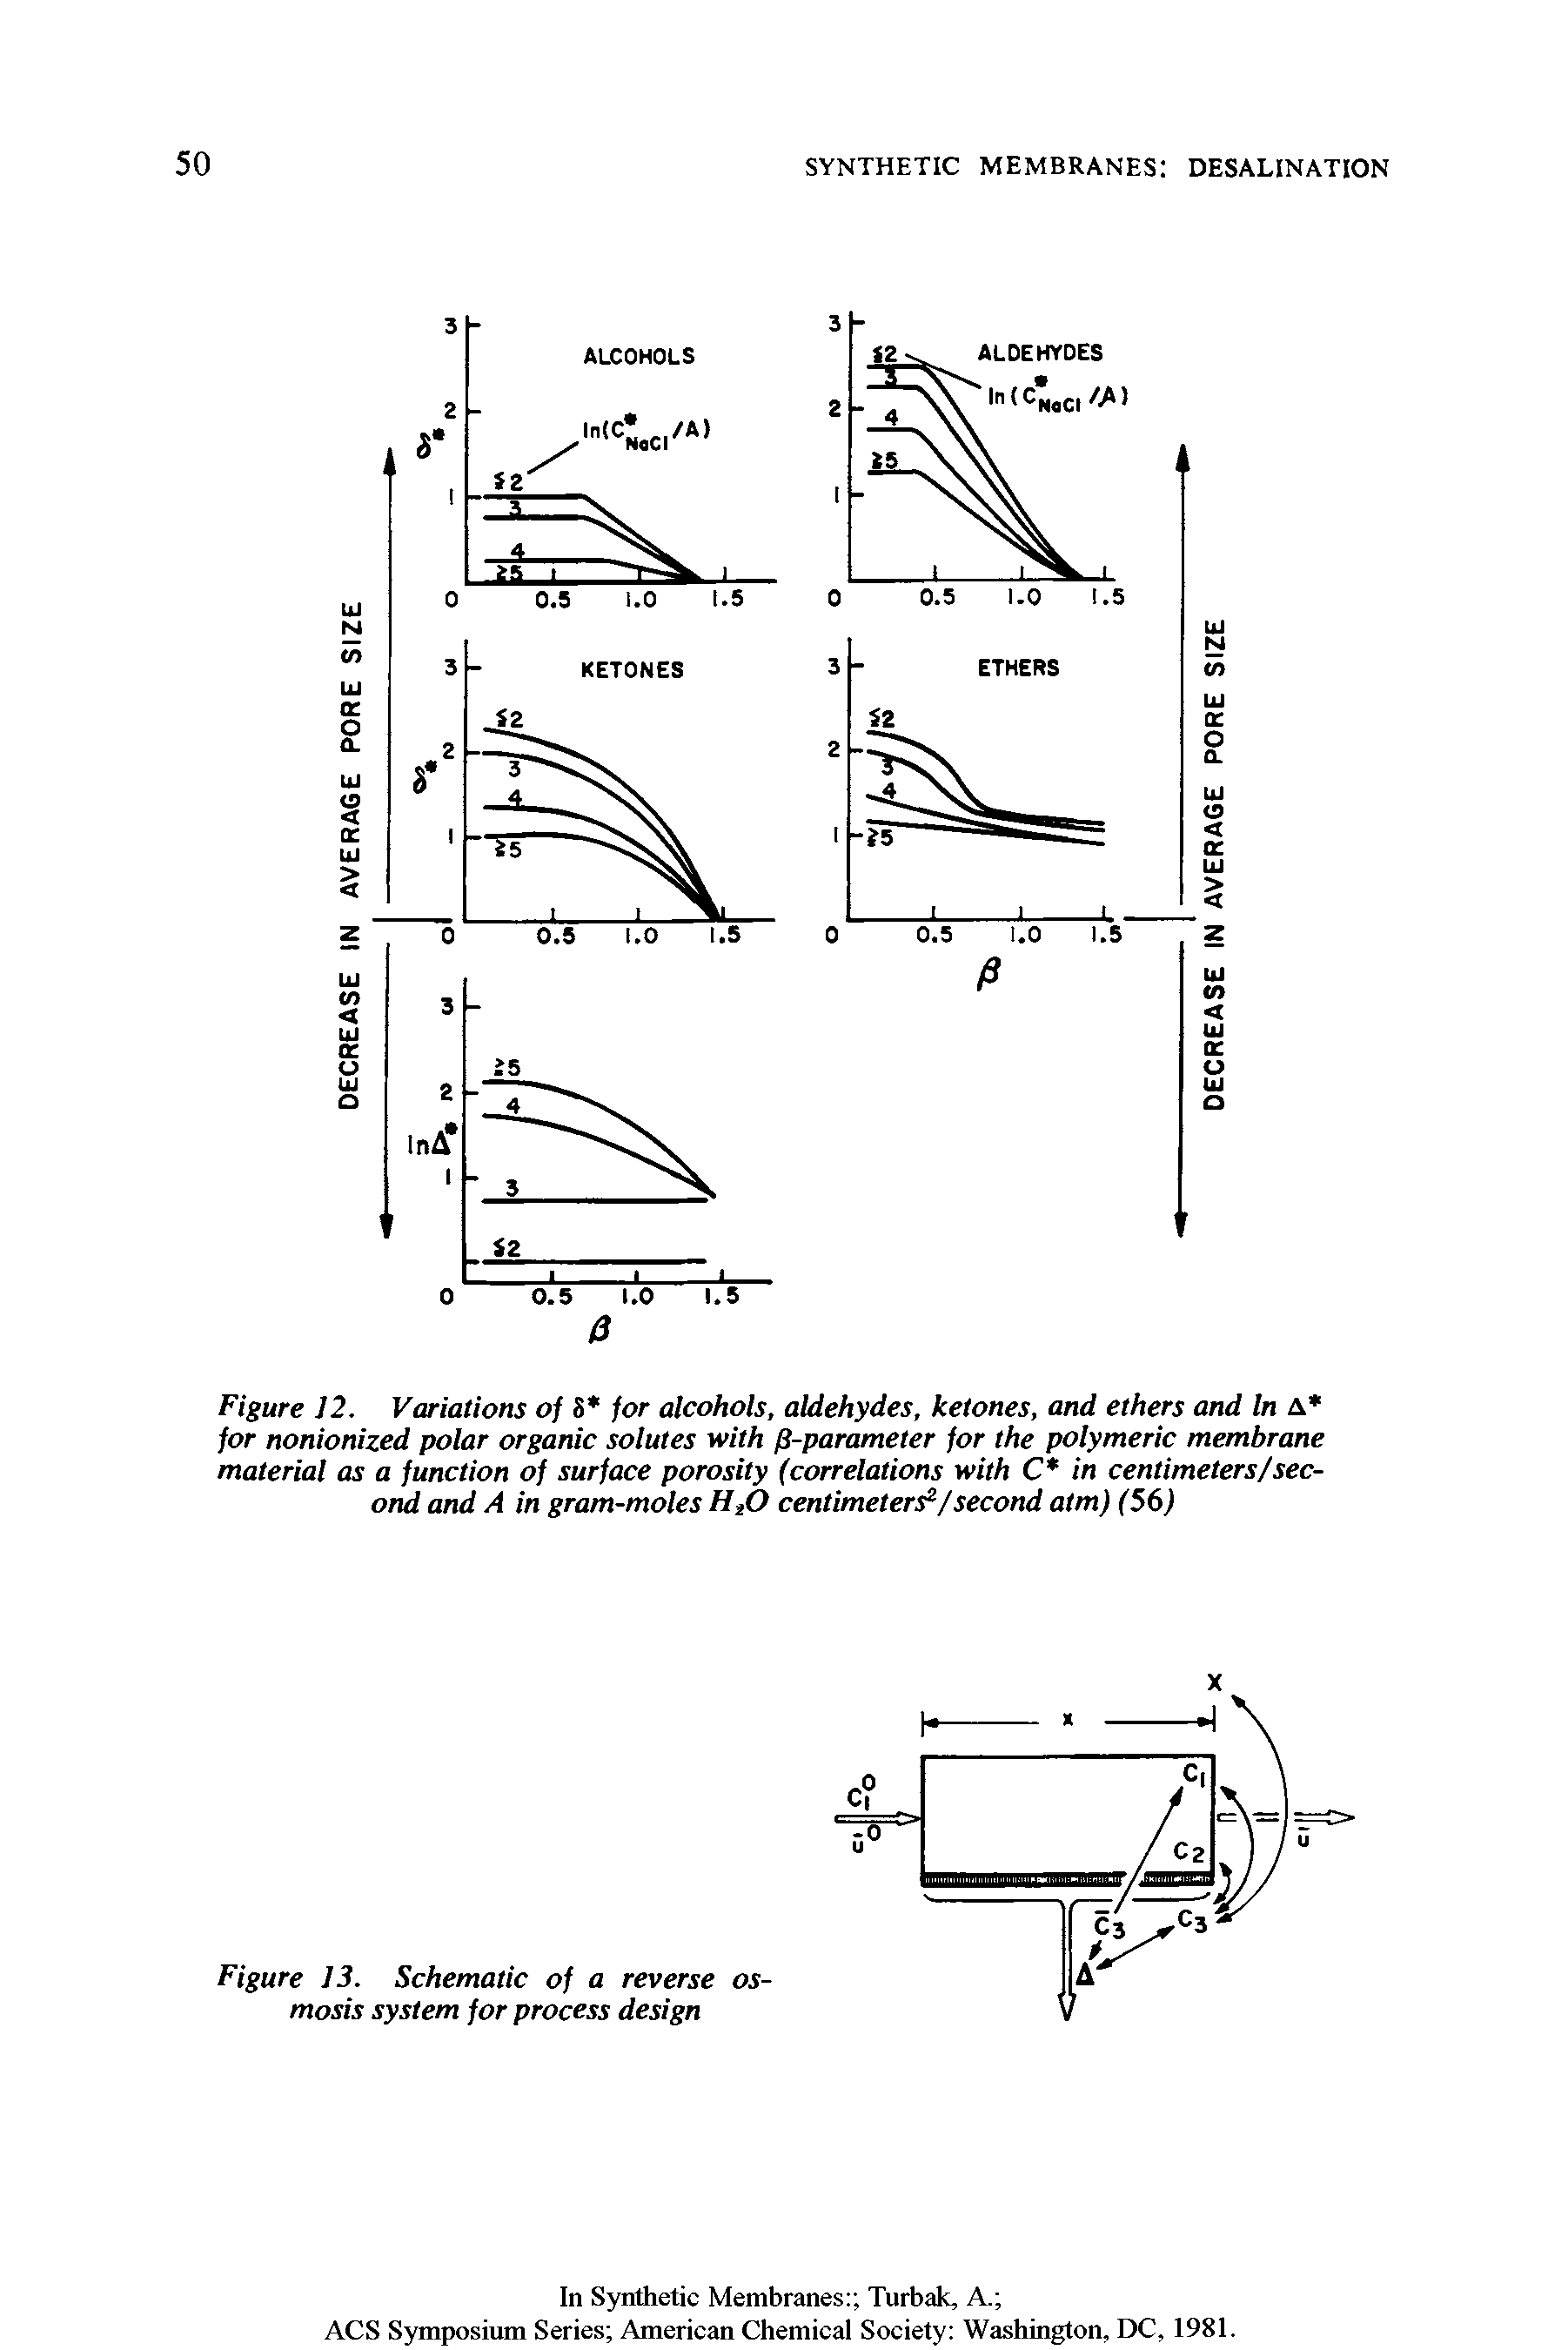 Figure 12. Variations of S for alcohols, aldehydes, ketones, and ethers and In A for nonionized polar organic solutes with -parameter for the polymeric membrane material as a function of surface porosity (correlations with C in centimeters/sec-ond and A in gram-moles hJ) centimeter /second atm) (56)...